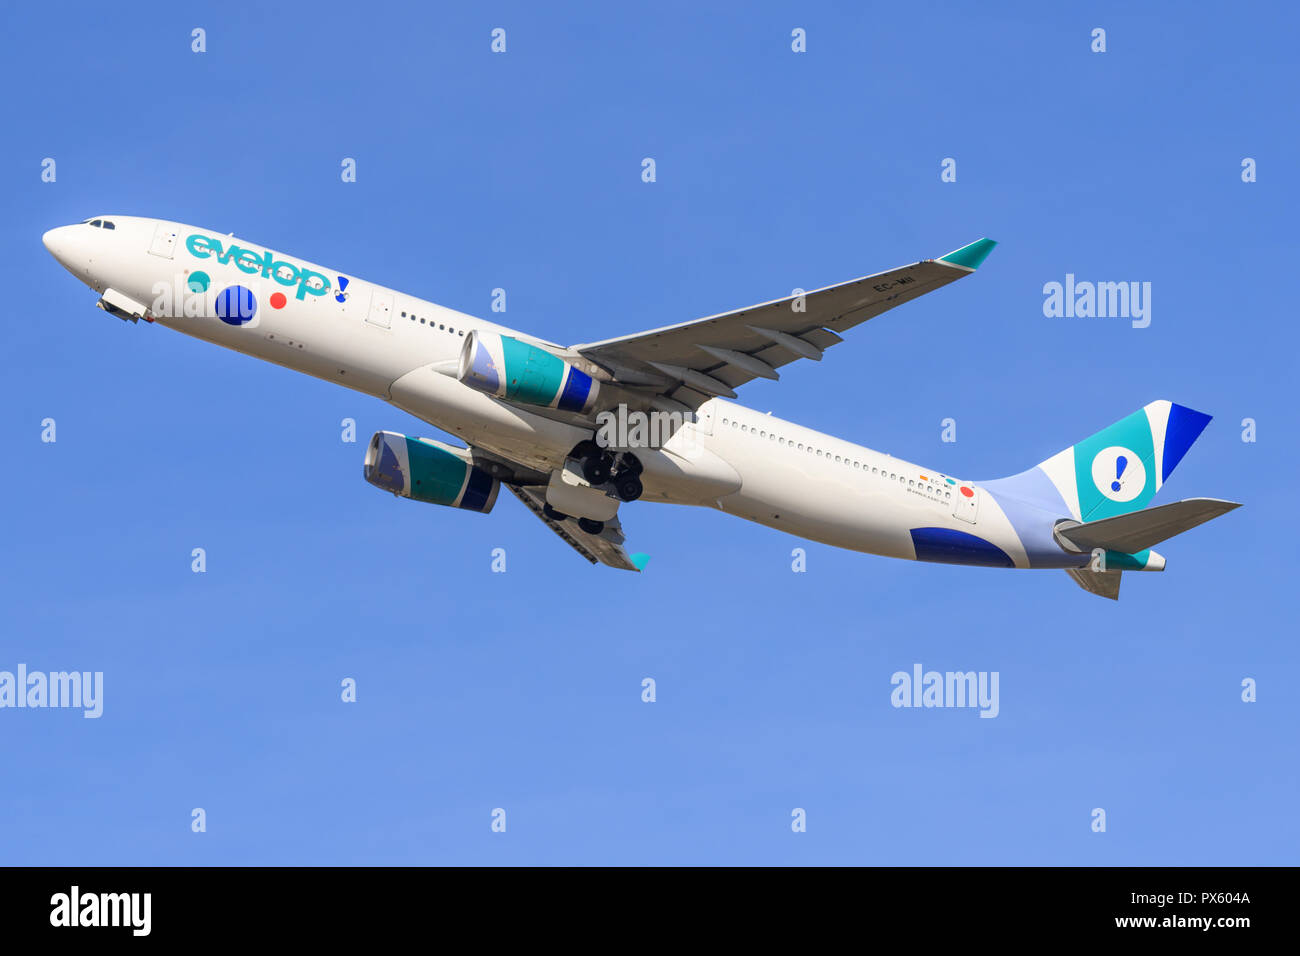 Paris/France October 9, 2018: Airbus A330 from Orbest landing at Paris Airport. Stock Photo